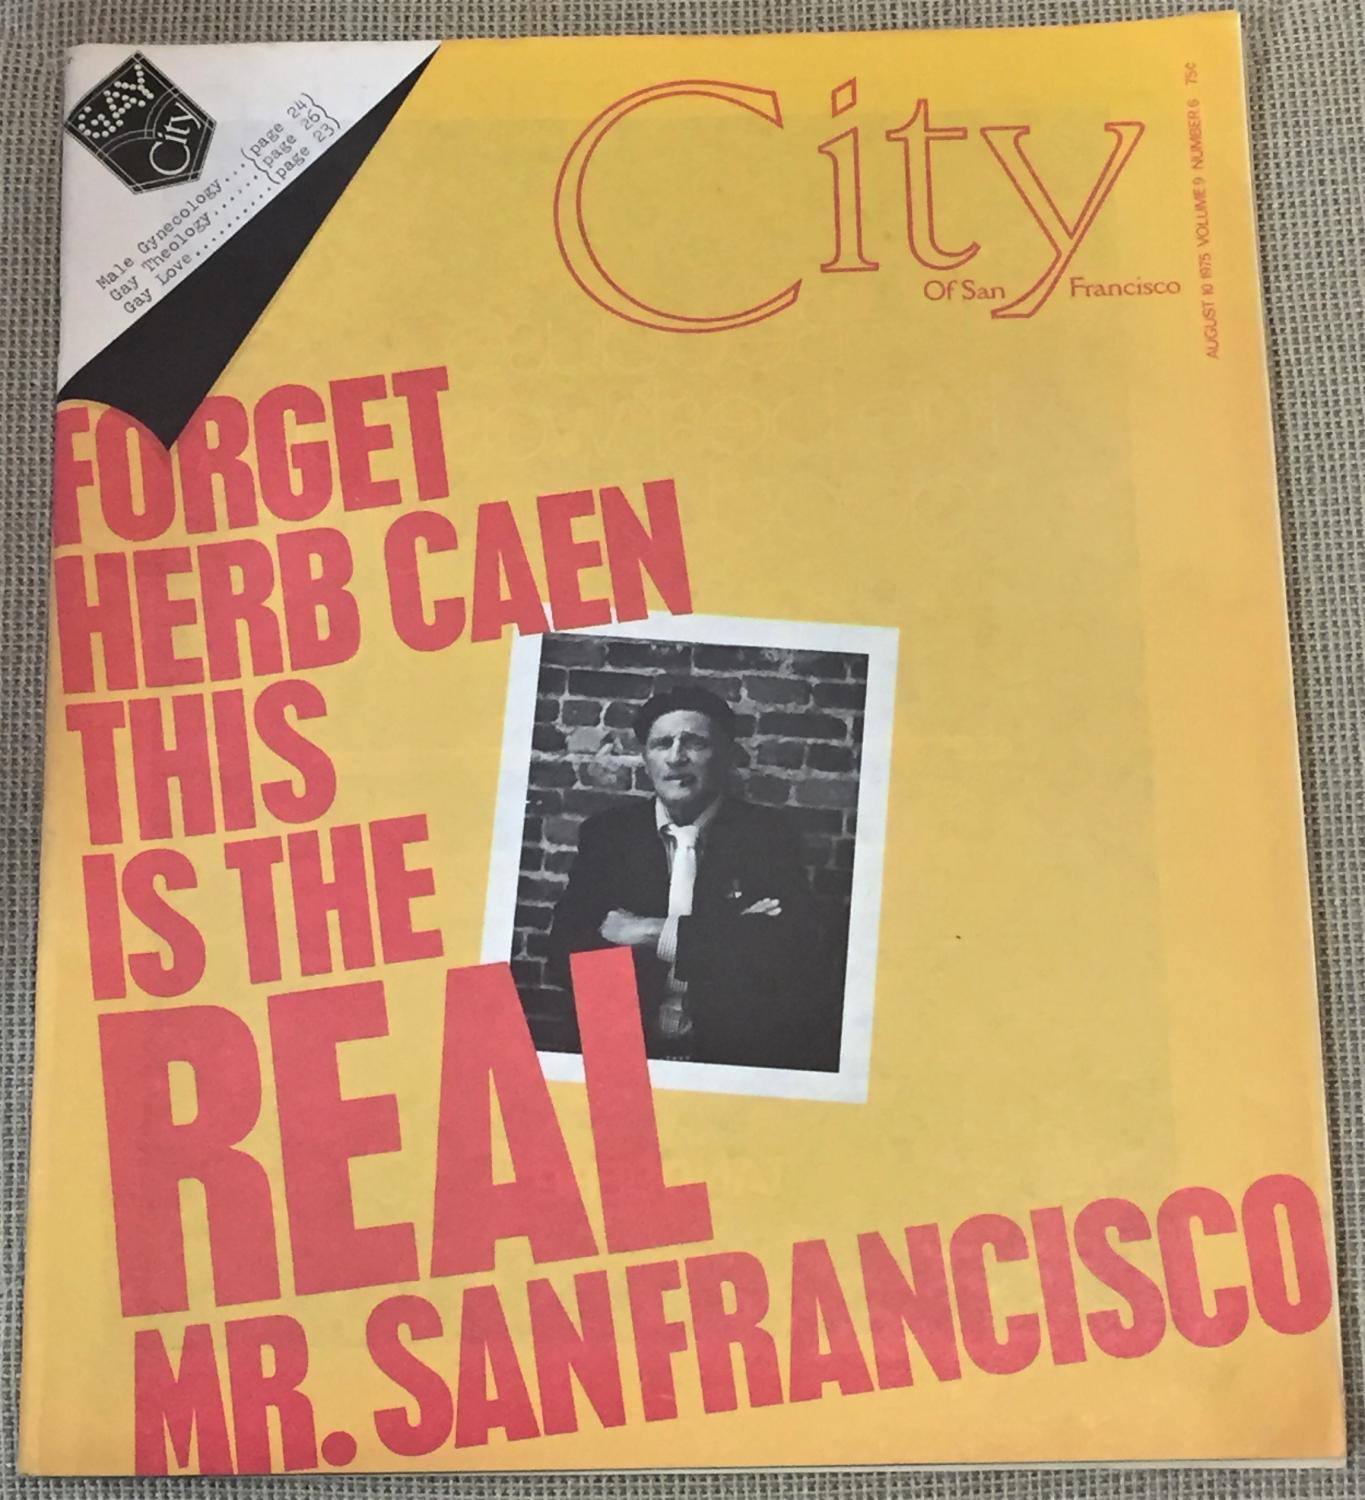 Francis Ford Coppola, publisher / CITY OF SAN FRANCISCO AUGUST 10 1975